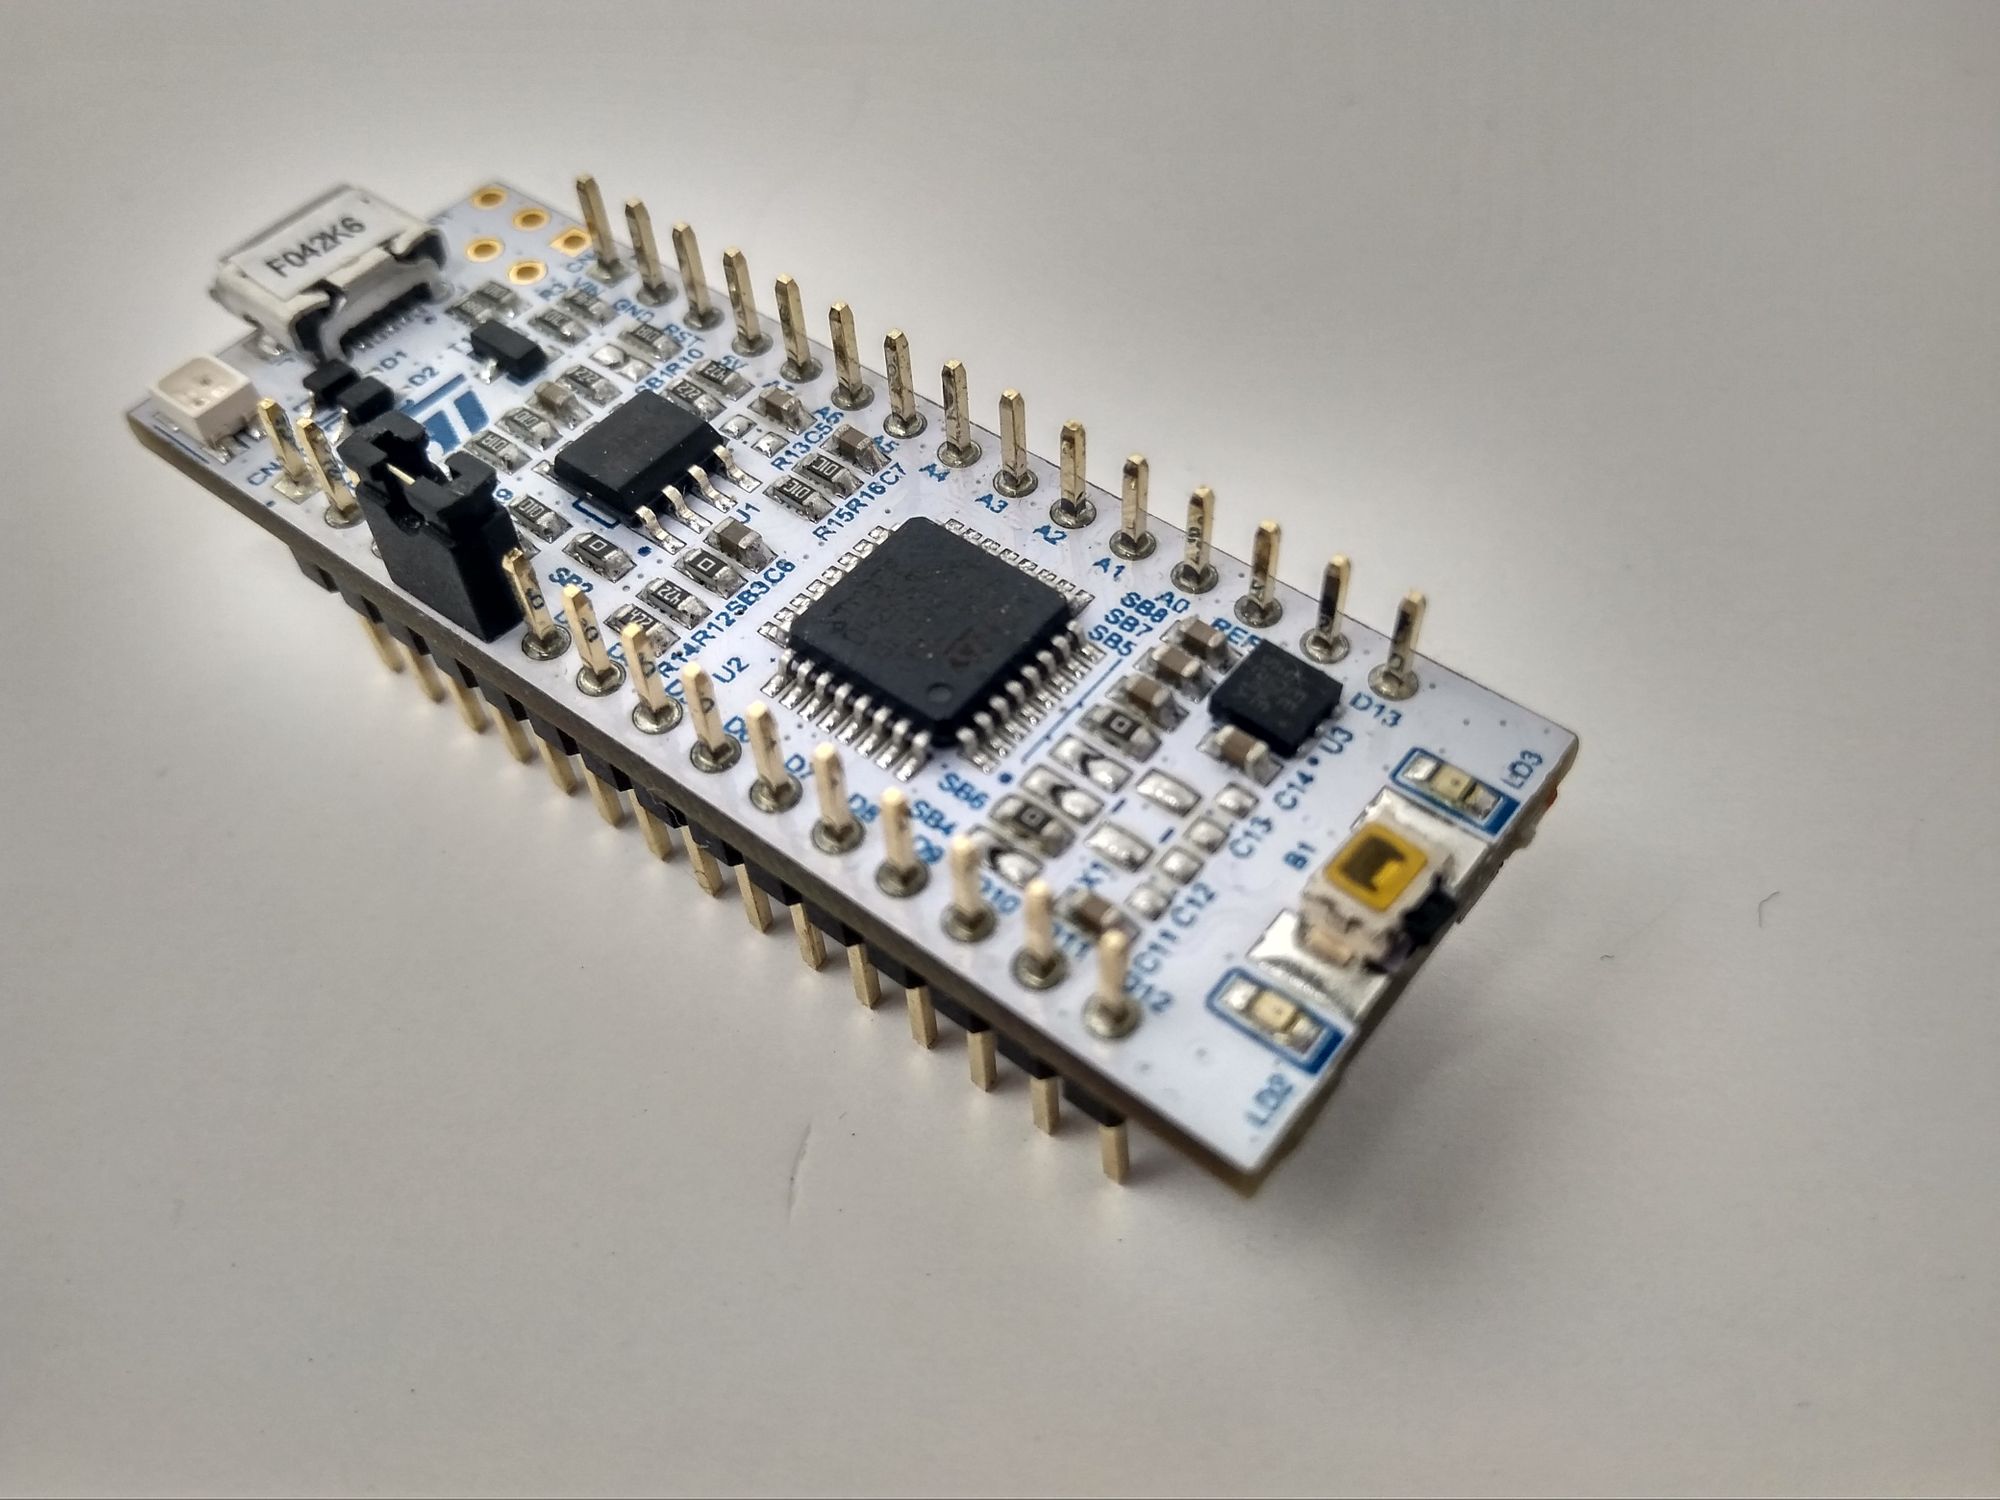 Getting Started with Atollic TrueStudio and STM32